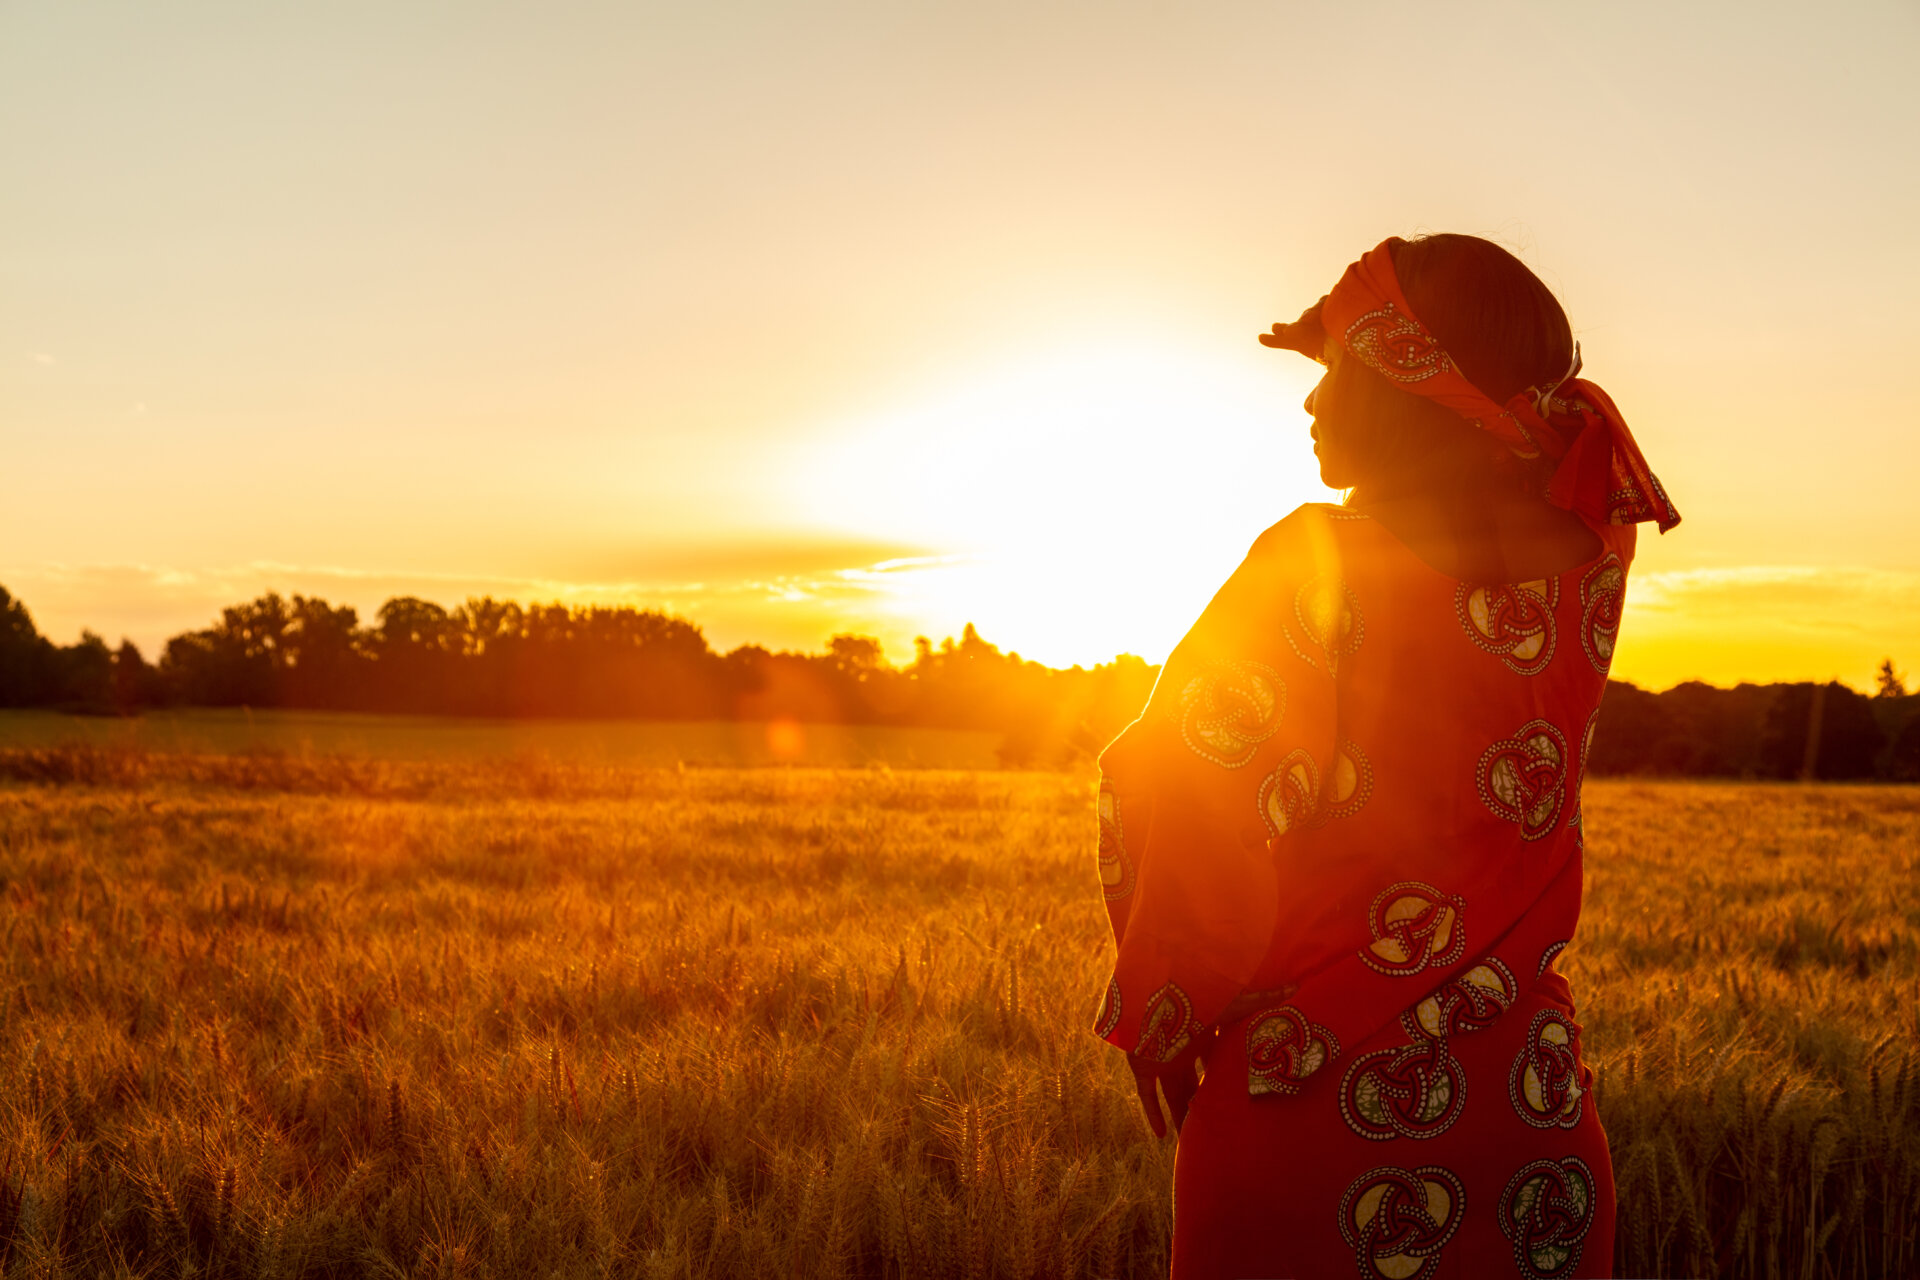 frican woman in traditional clothes standing in a field of crops at sunset or sunrise